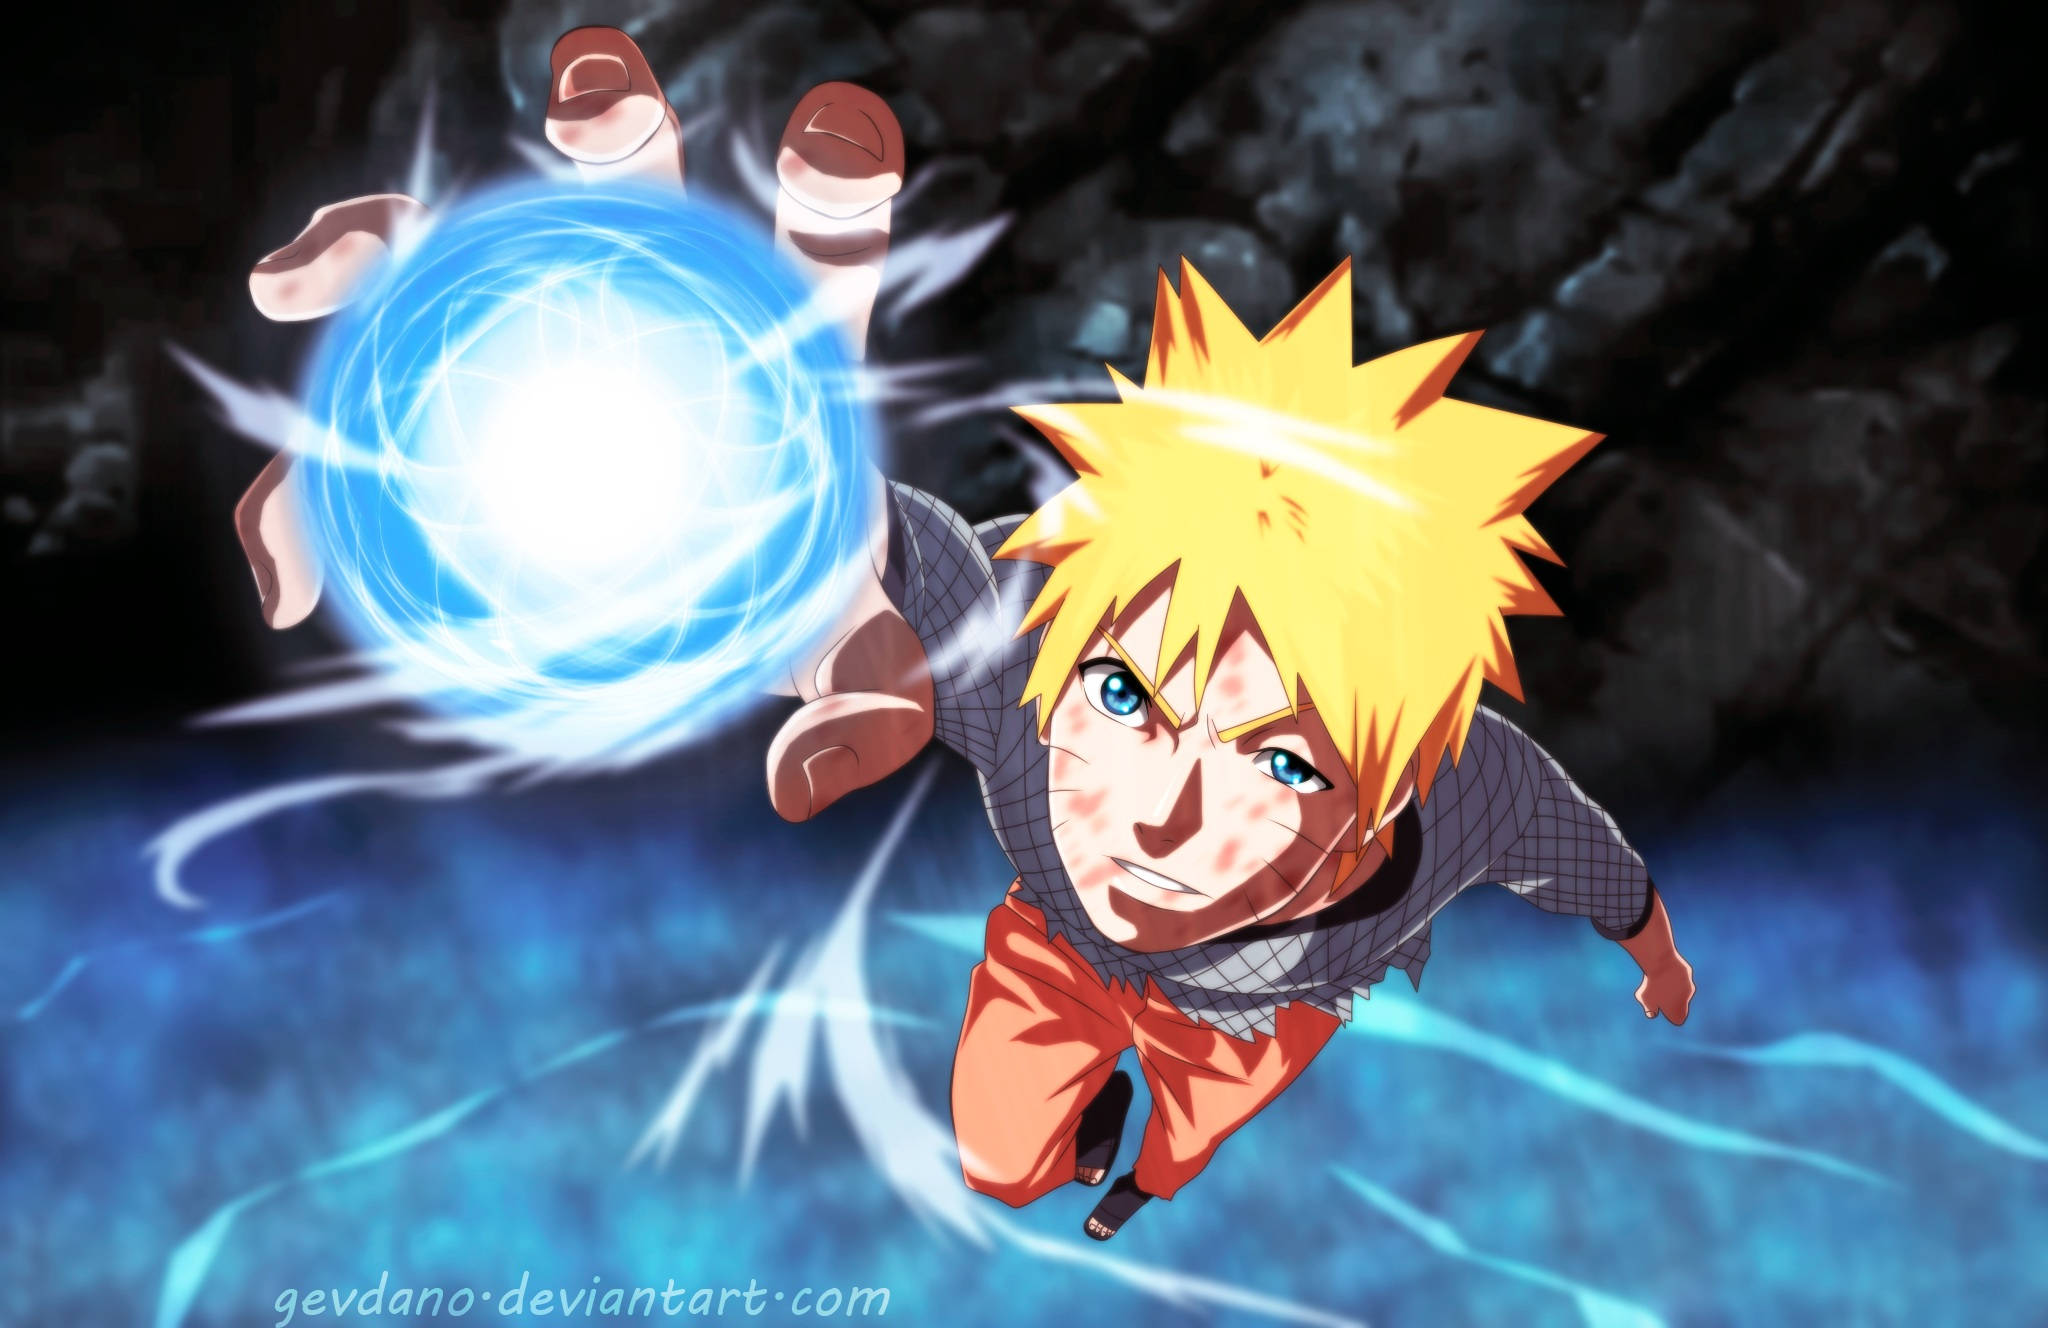 Download Naruto Reaching Out With Rasengan Wallpaper | Wallpapers.com